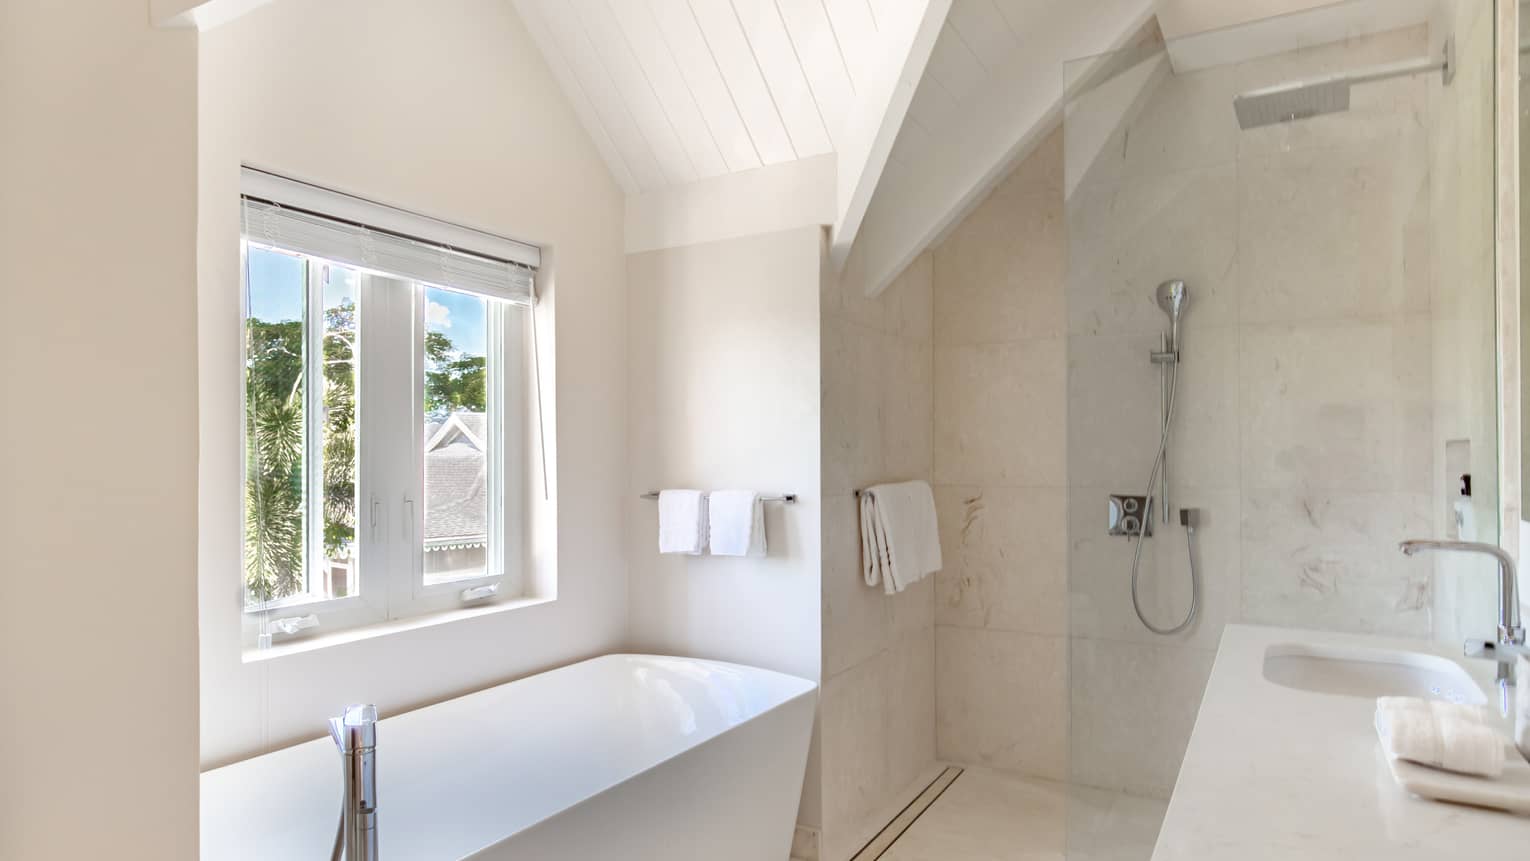 Light-coloured marble bathroom with walk-in glass shower, separate tub, window and double vanity